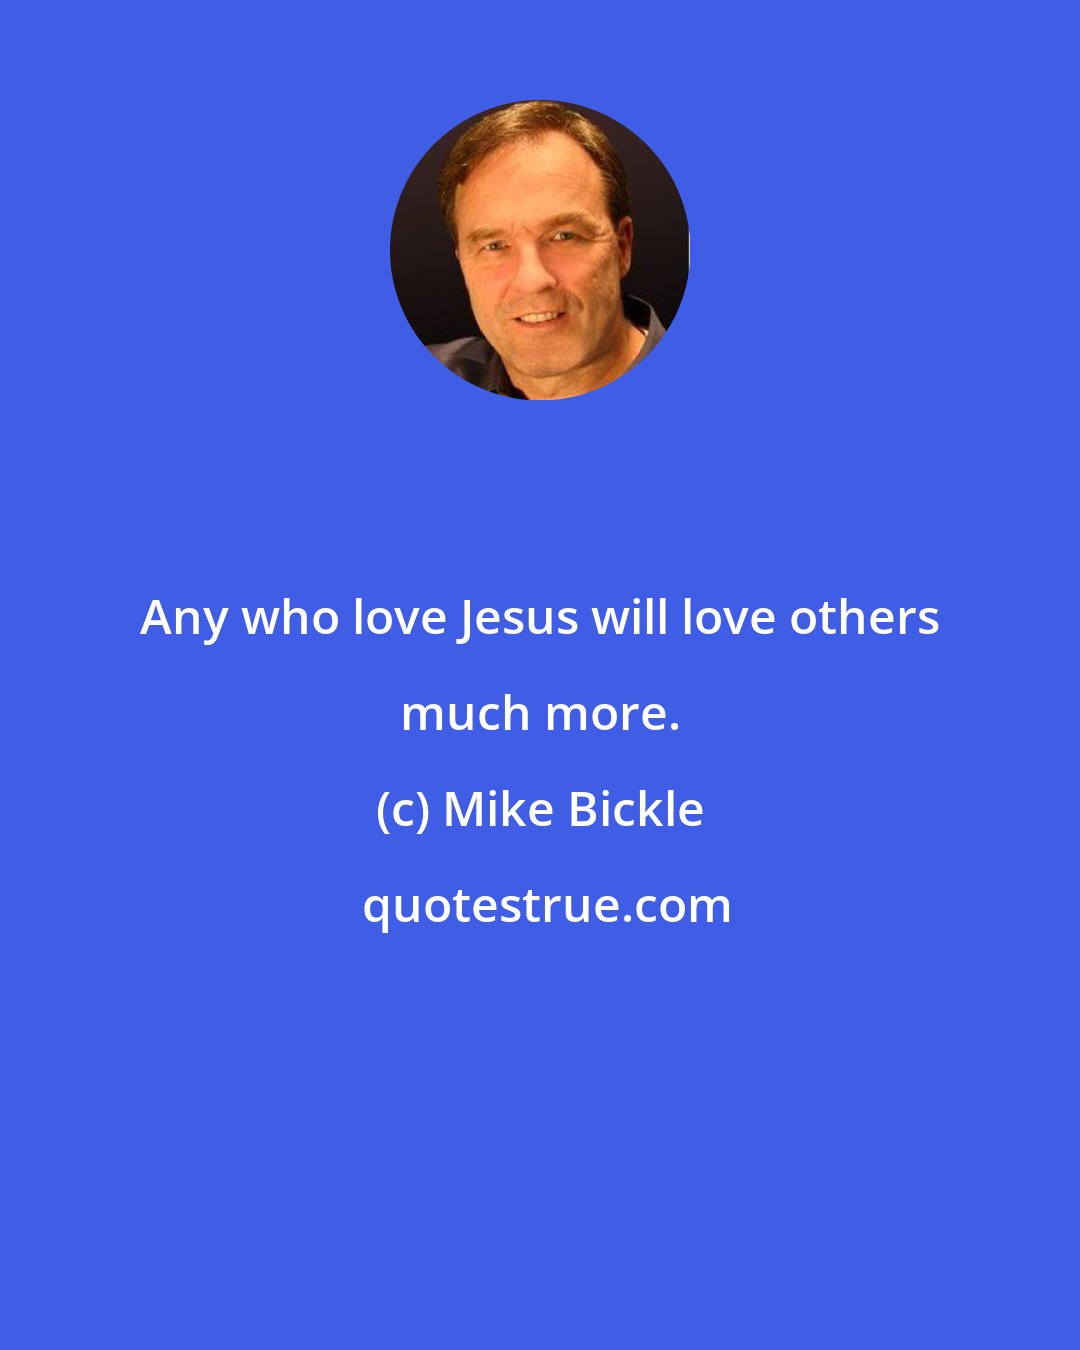 Mike Bickle: Any who love Jesus will love others much more.